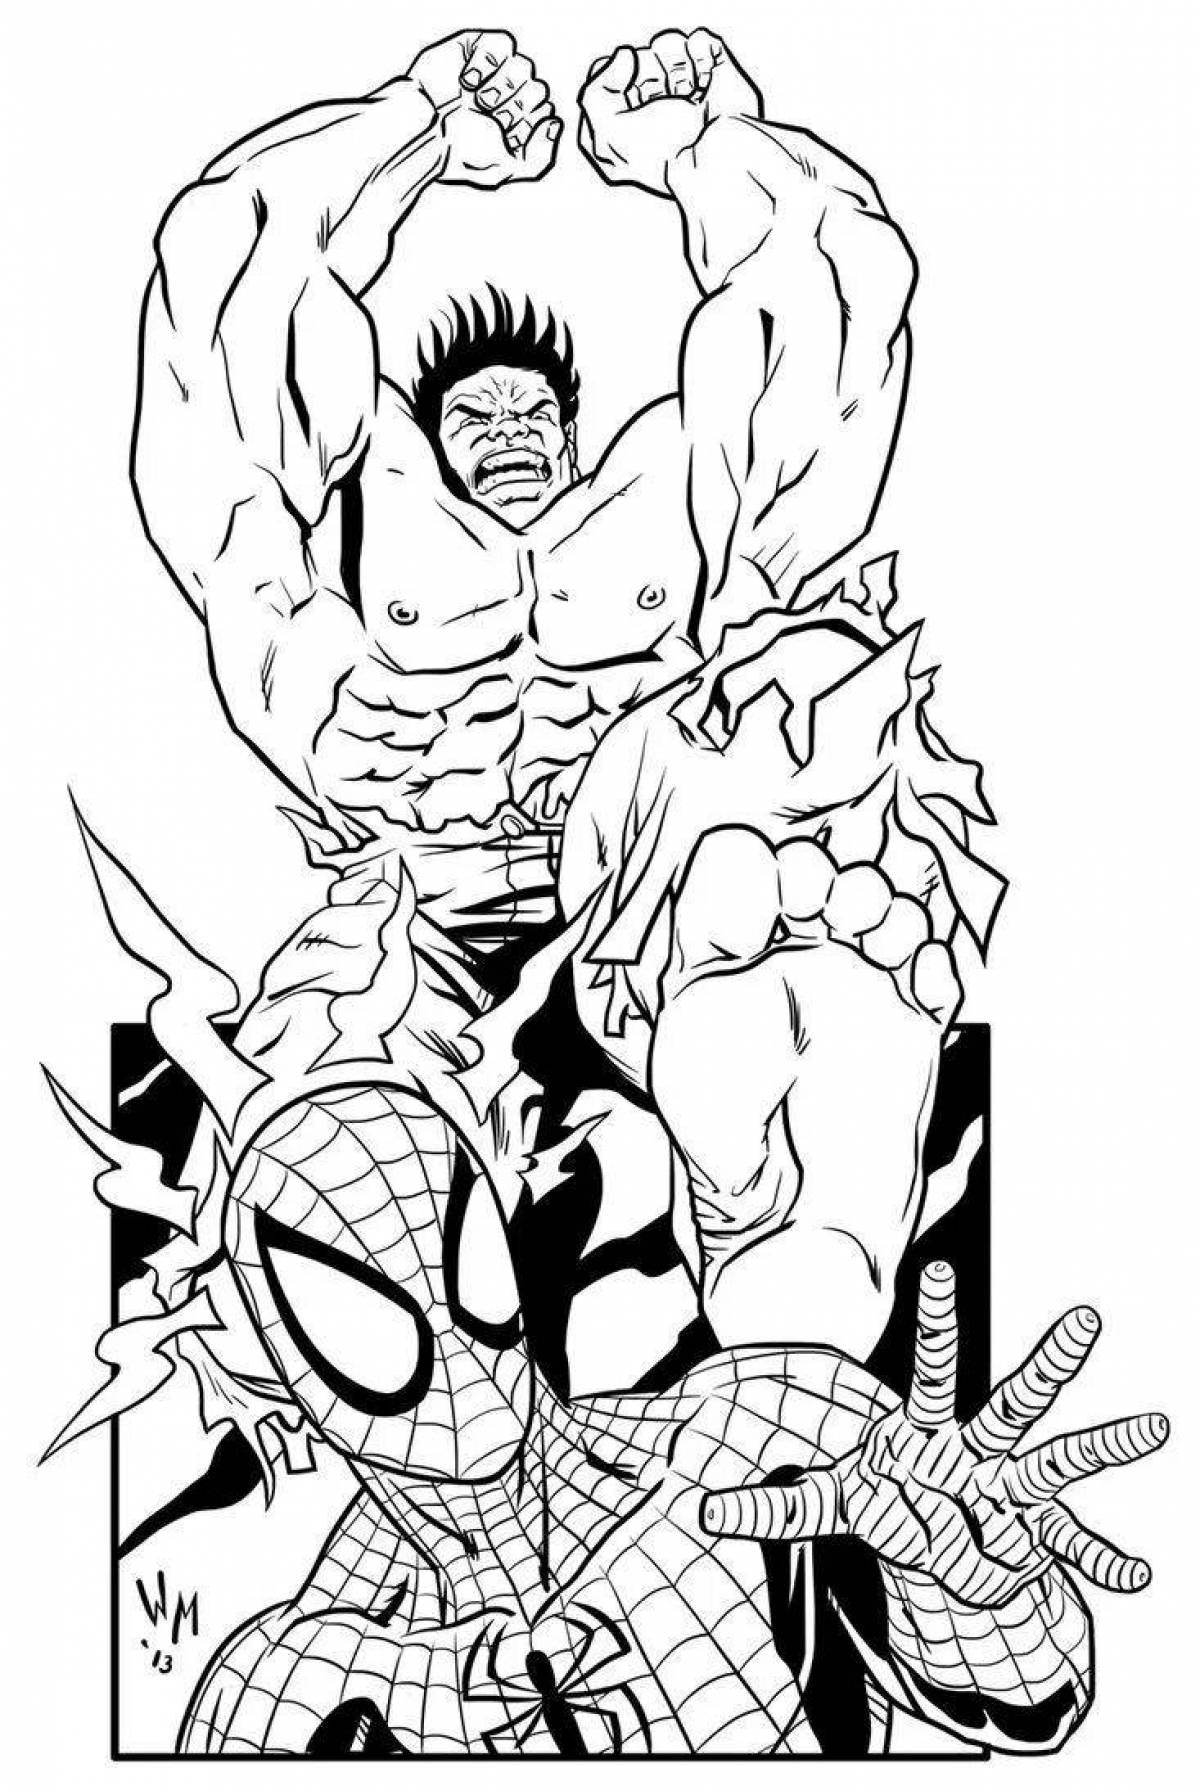 Joyful hulk and spiderman coloring pages for kids